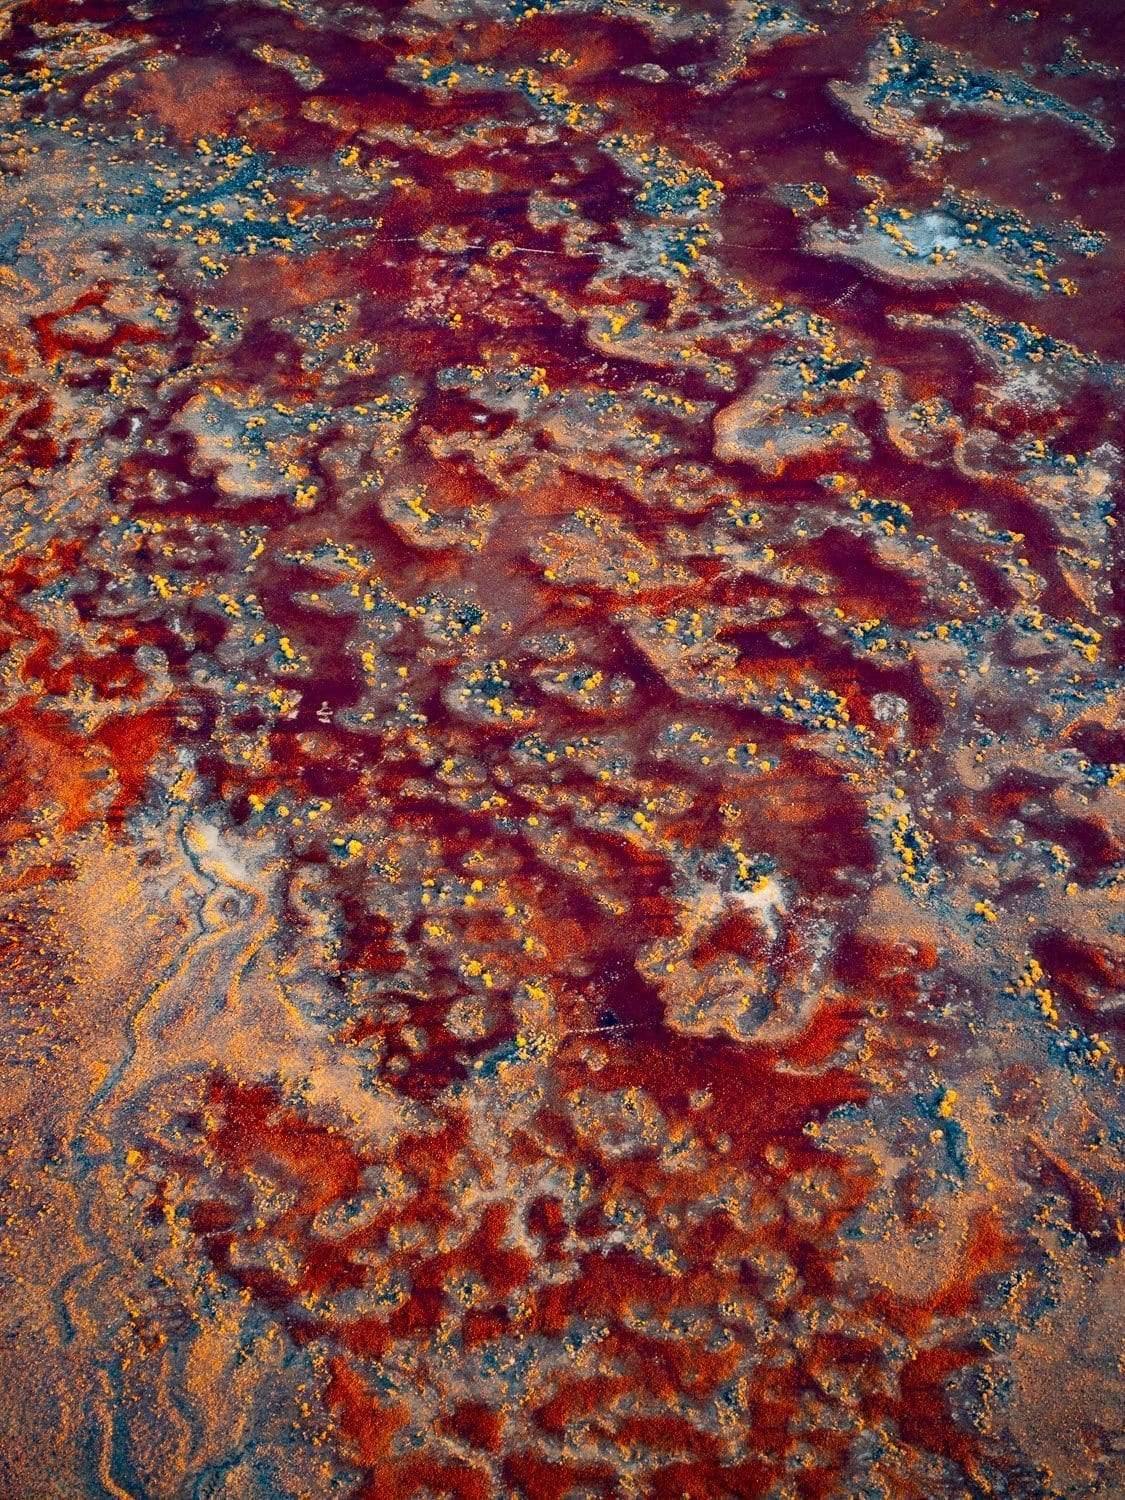 unique curvy texture on of red and orangish color, Red Earth